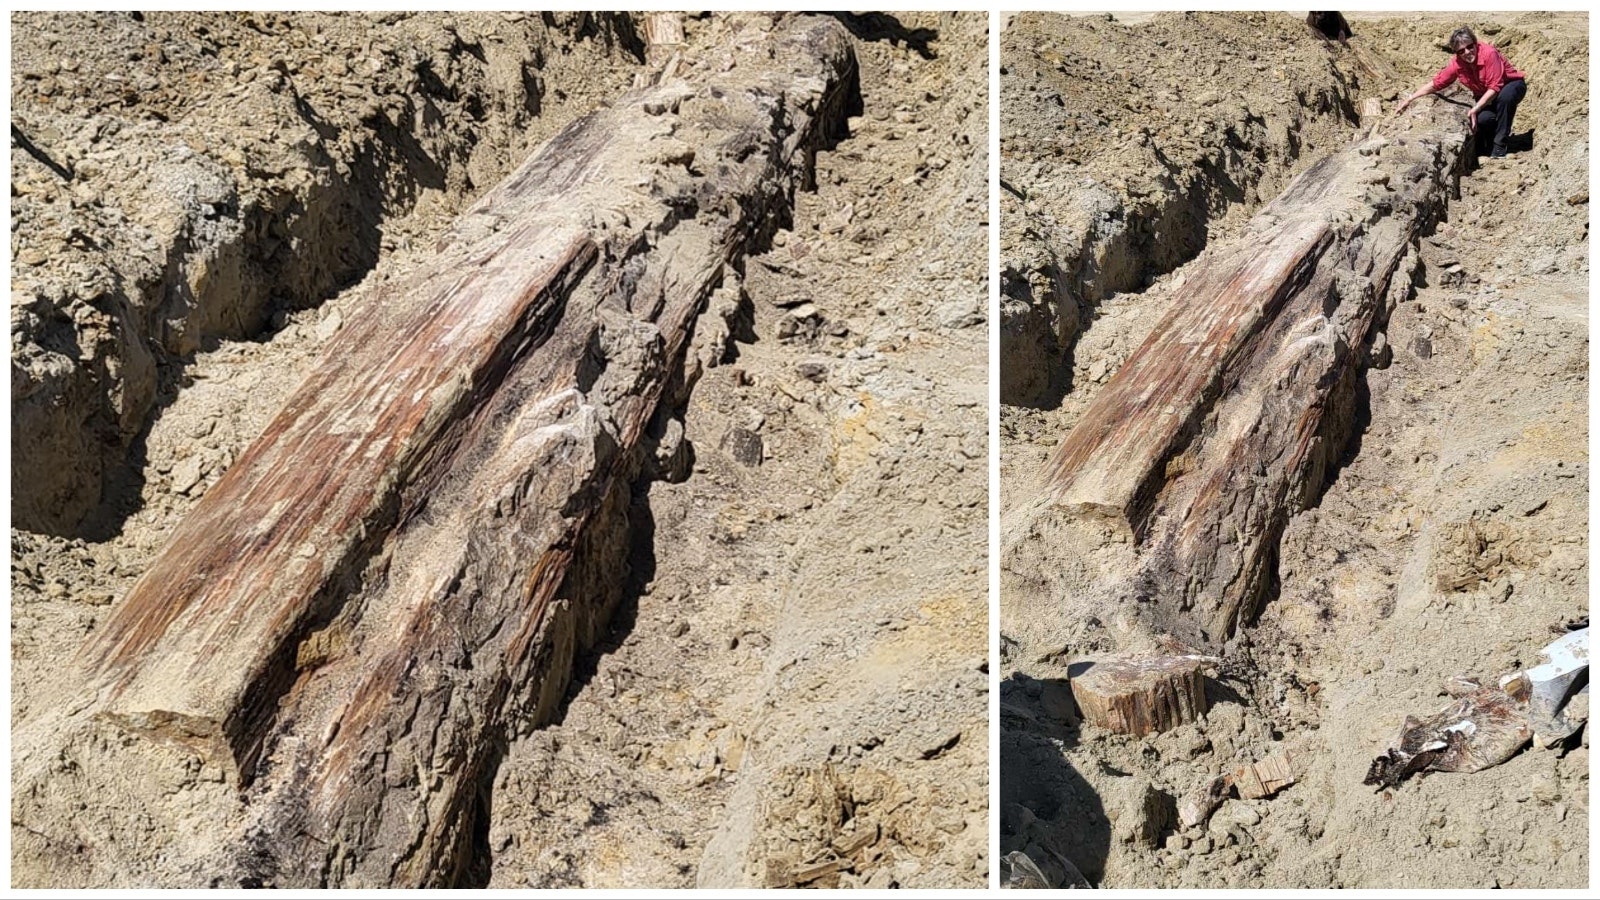 A Buffalo, Wyoming, couple found this giant 35-foot section of a 60 million-year-old petrified tree on their property.